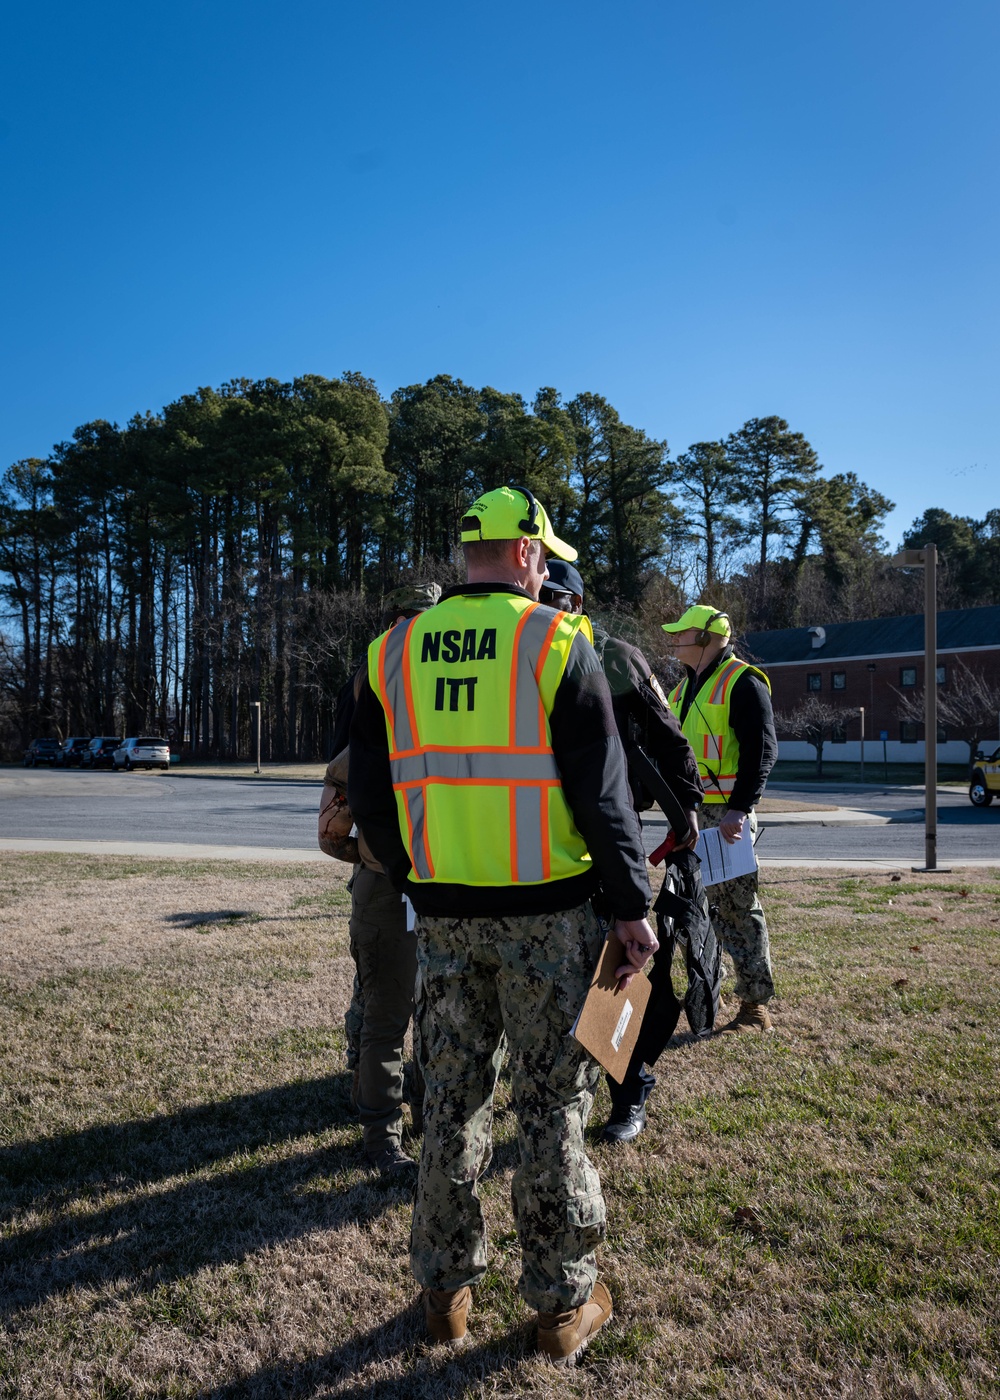 Naval Support Activity Annapolis Security Forces Participate in Annual Training Exercise